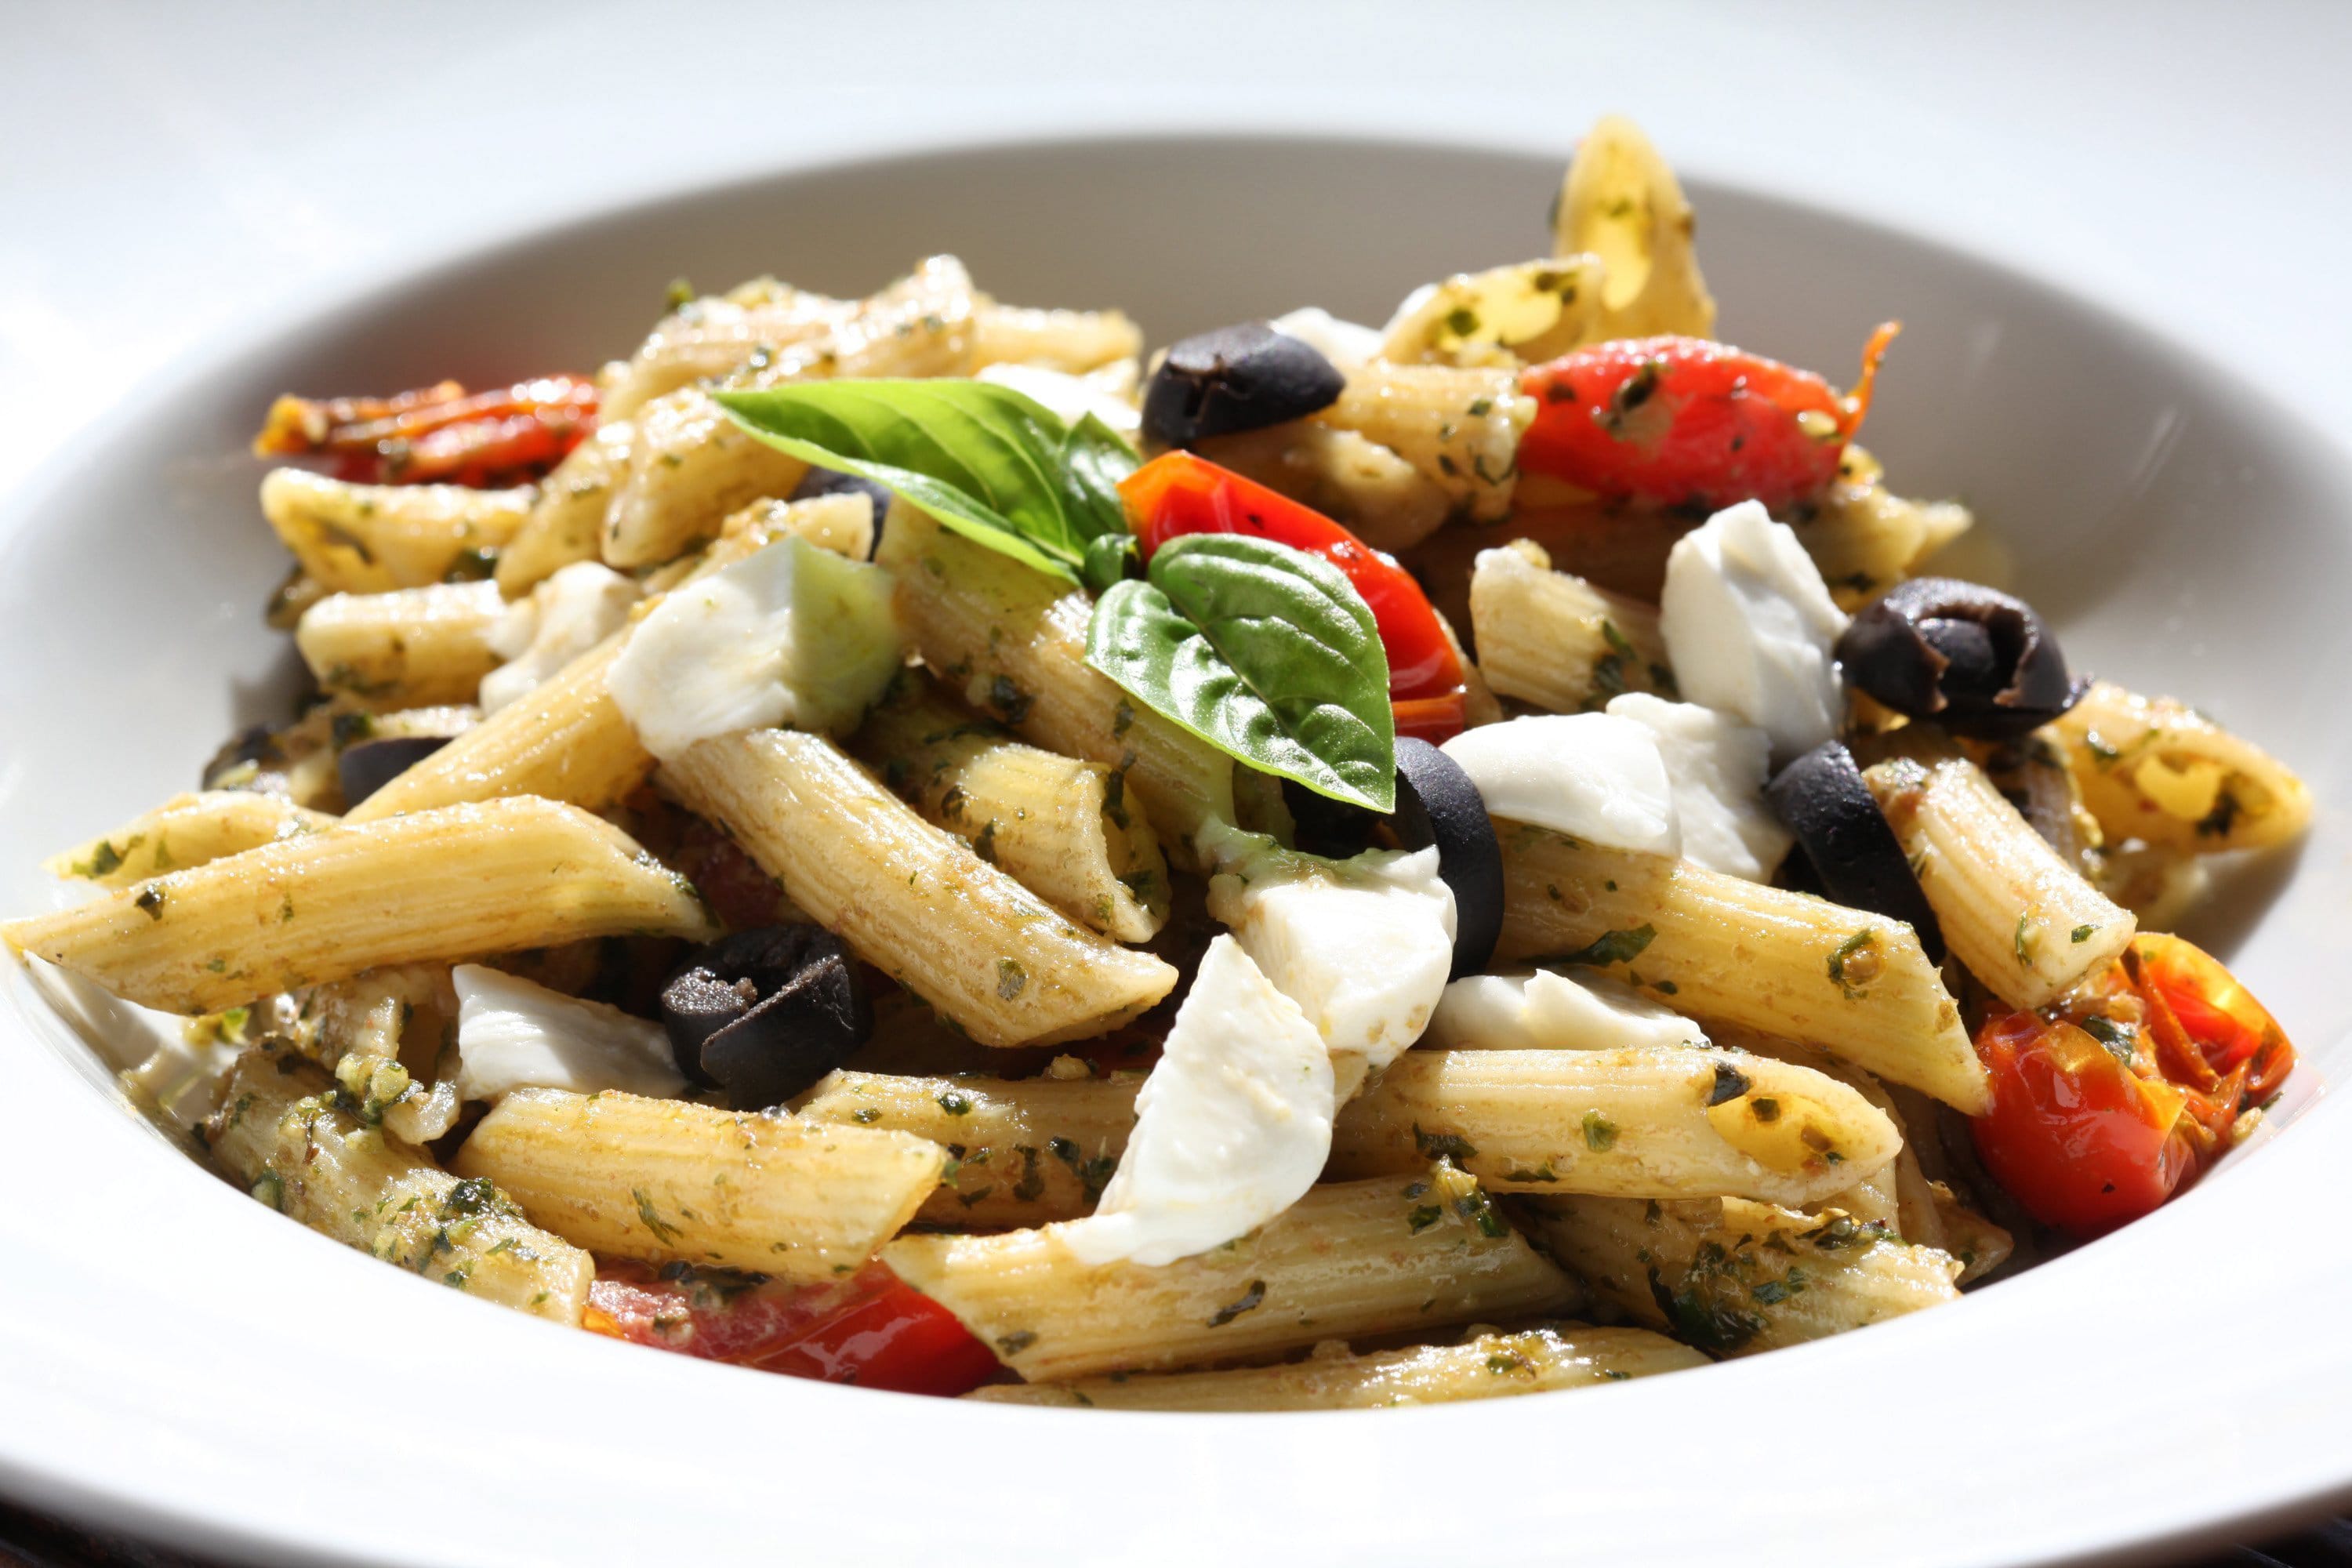 Penne With Pesto, Tomatoes, and Olives is a simple dish to make but packed with a wealth of bright flavors.